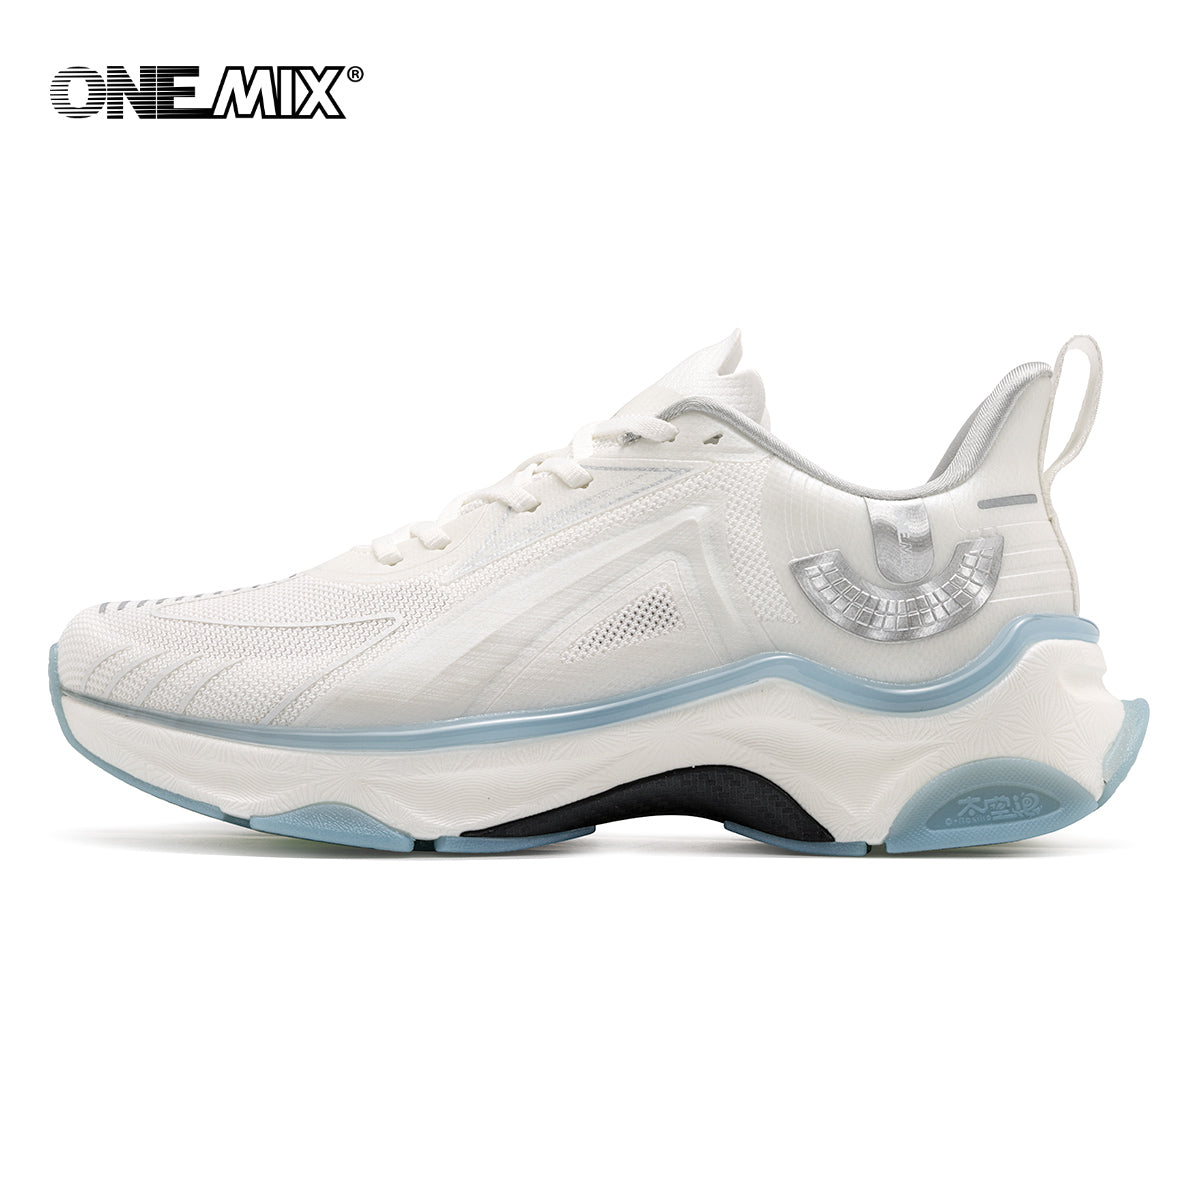 ONEMIX Breathable Lightweight Double-Structure Shock Absorber Race Running Shoes - Plantar Fasciitis Pain Relief